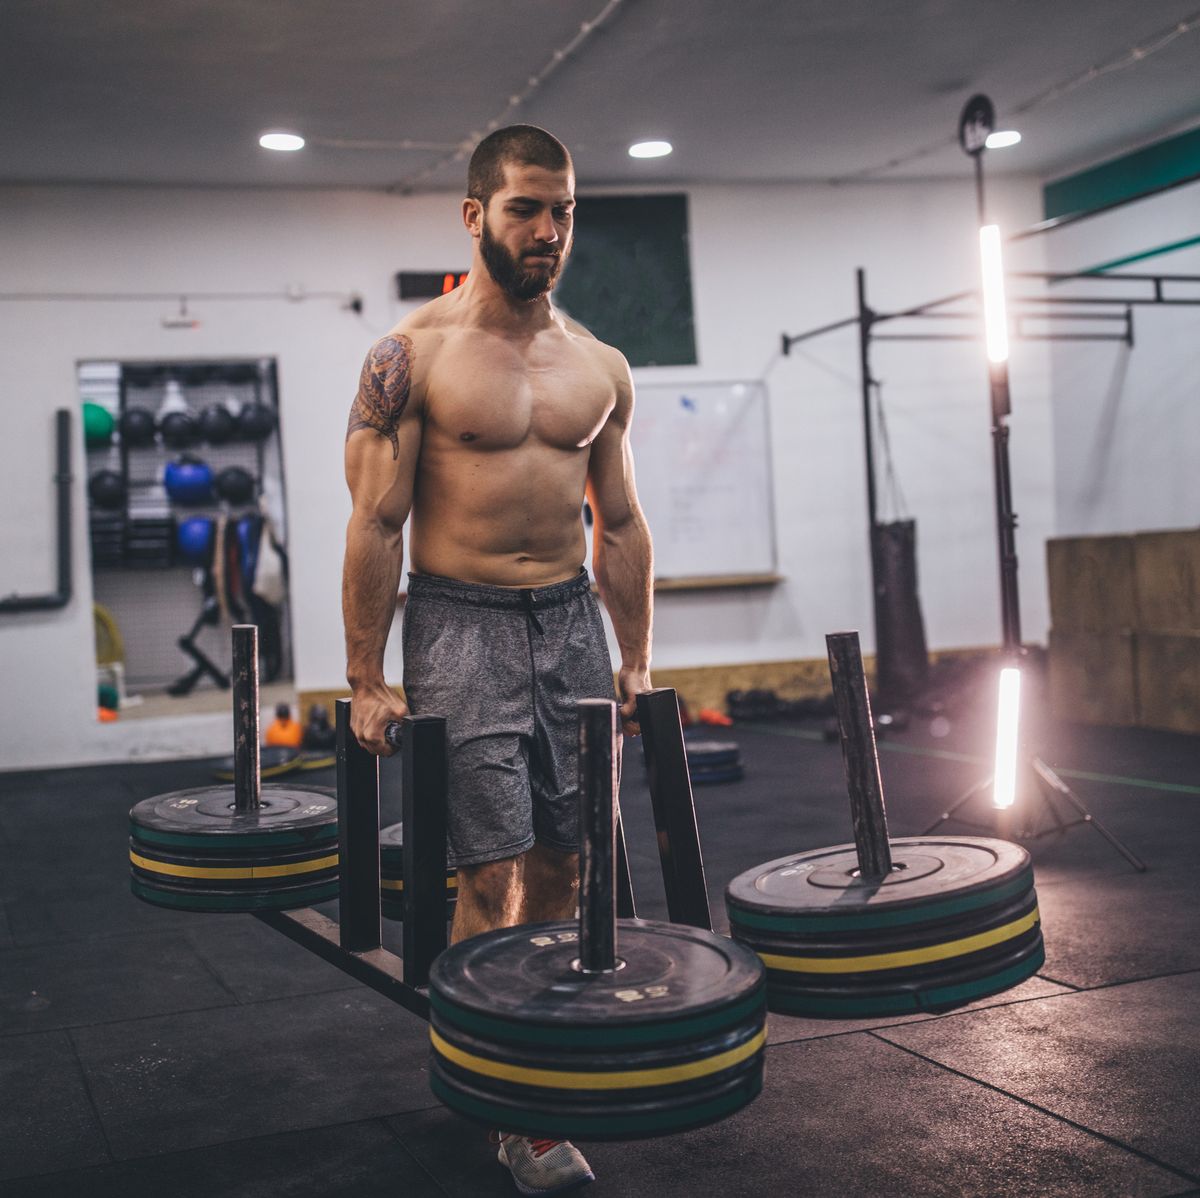 What is the best exercise to target your lower chest? - Quora